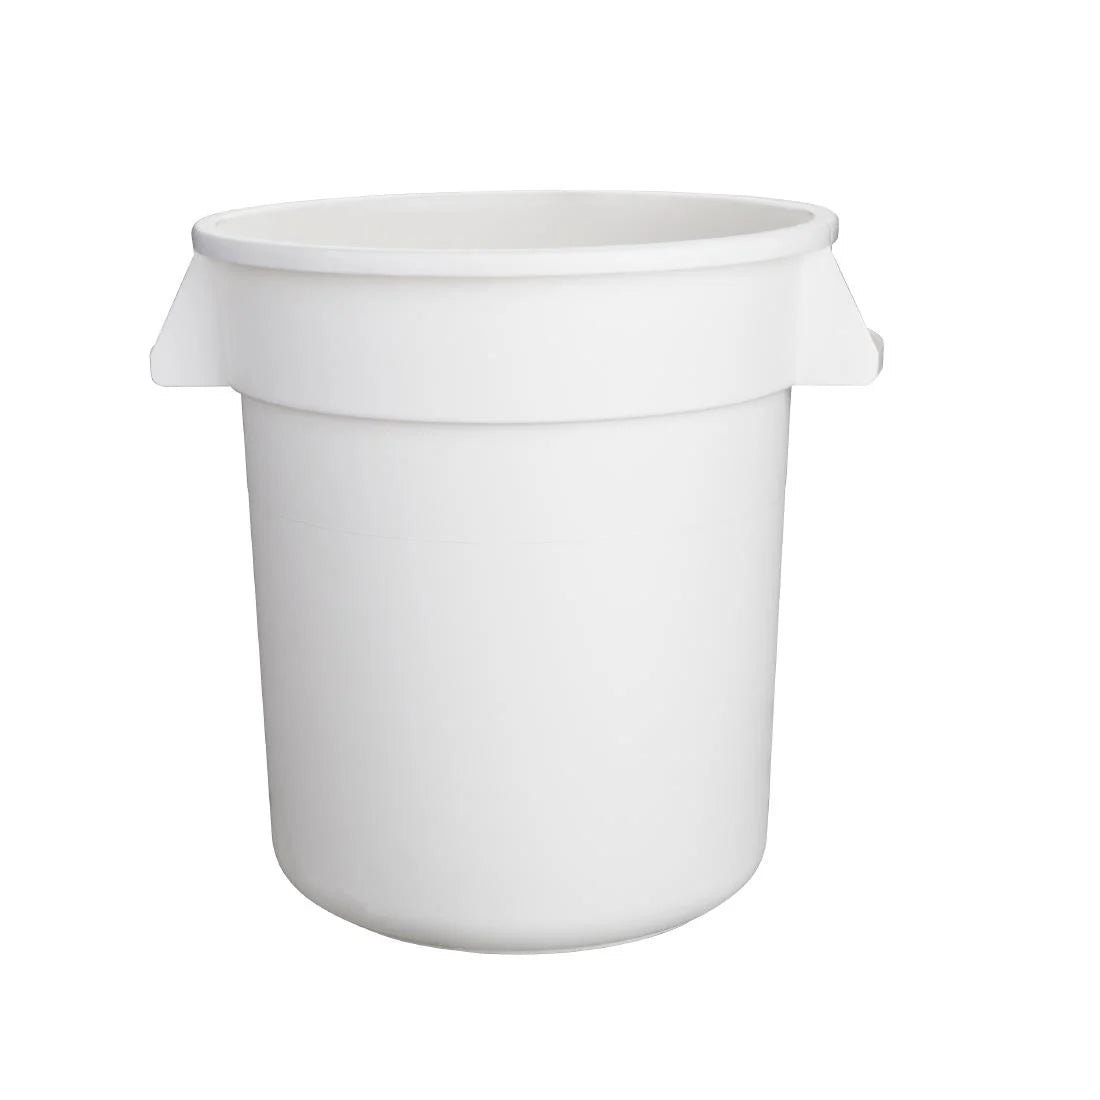 Polypropylene Round Container Bin White 38Ltr.Product Ref:00728.Model:GG792. 🚚 5-7 Days Delivery